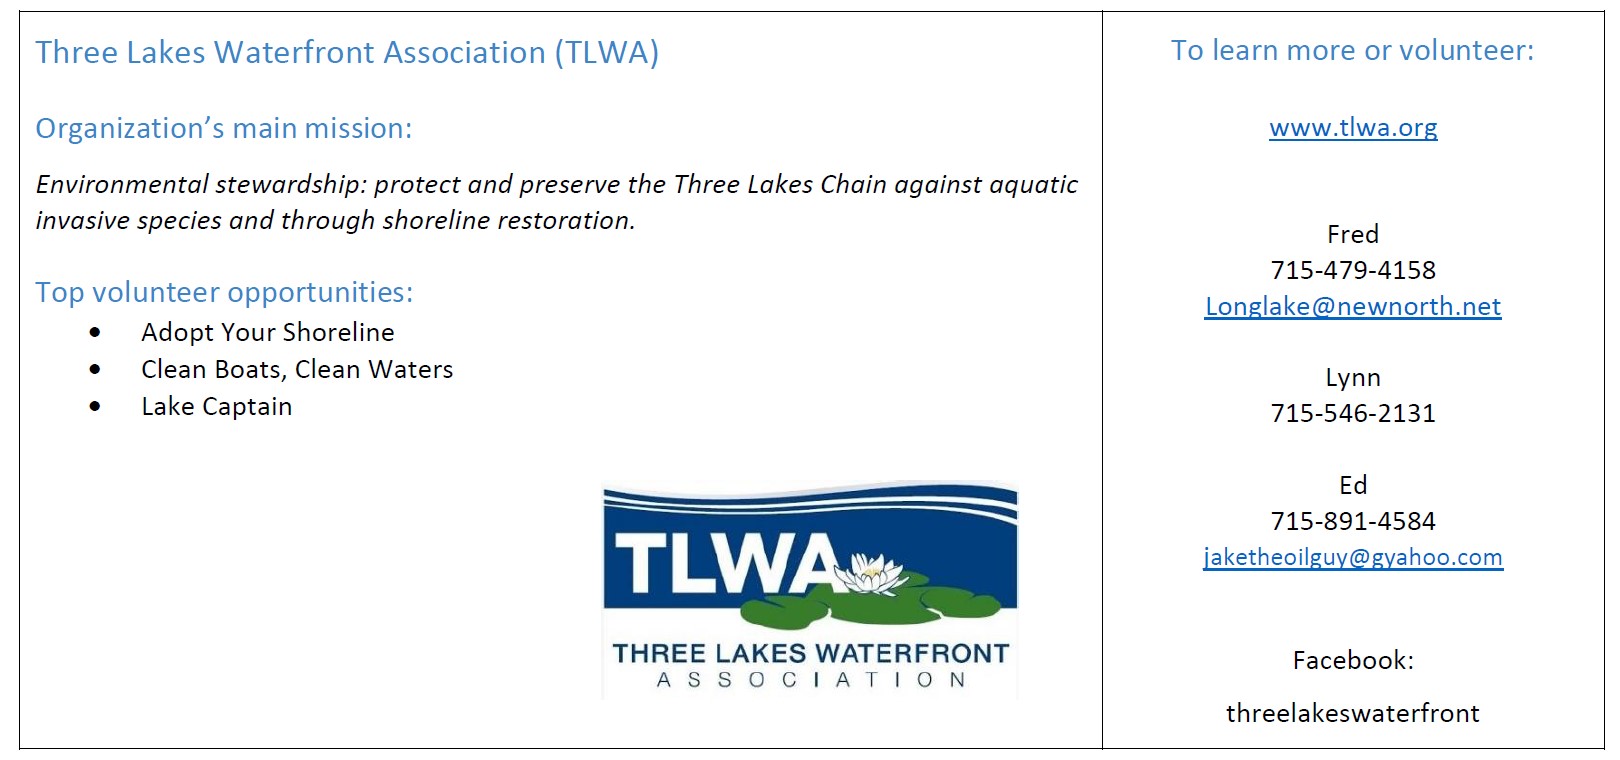 Volunteer opportunities with the Three Lakes Waterfront Association